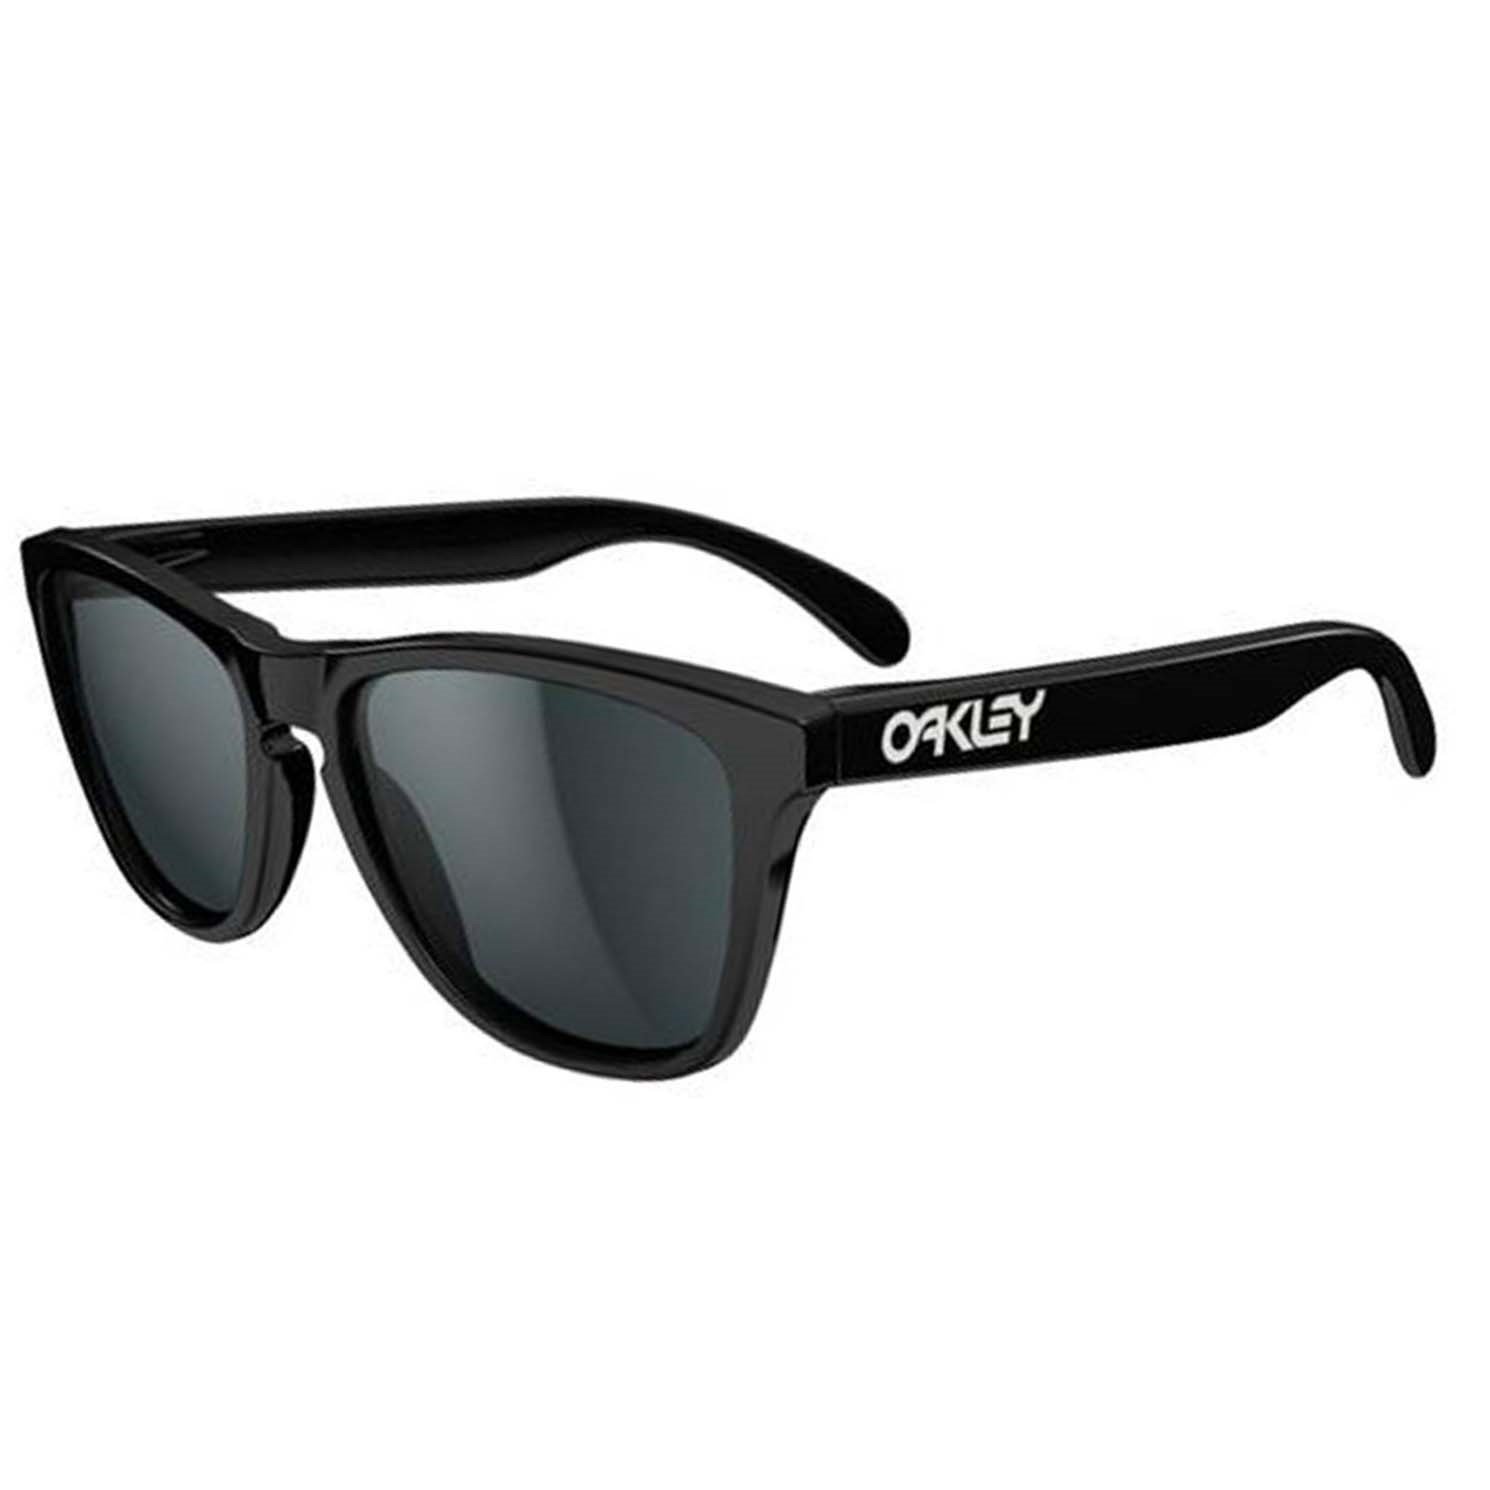 Oakley Frogskins sunglasses review: good for running?